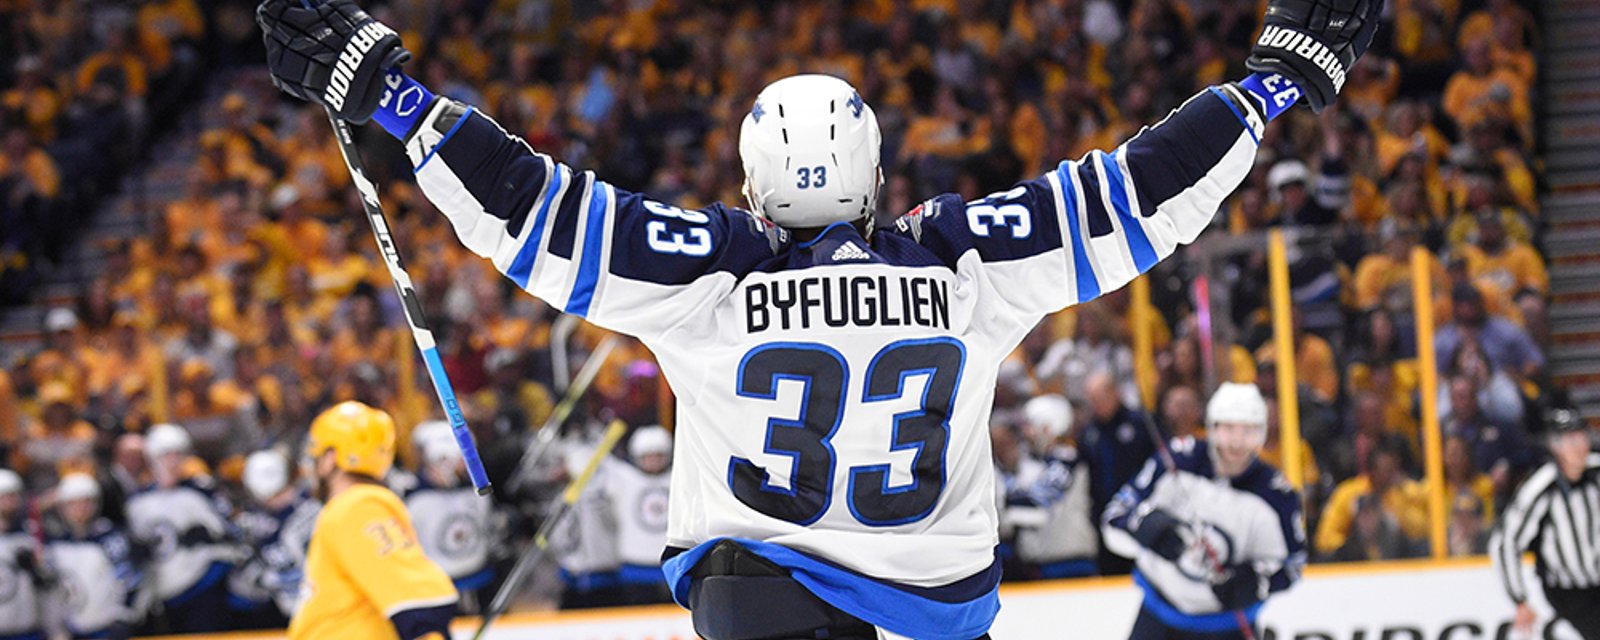 Details emerge about Byfuglien’s divorce from the Jets organization